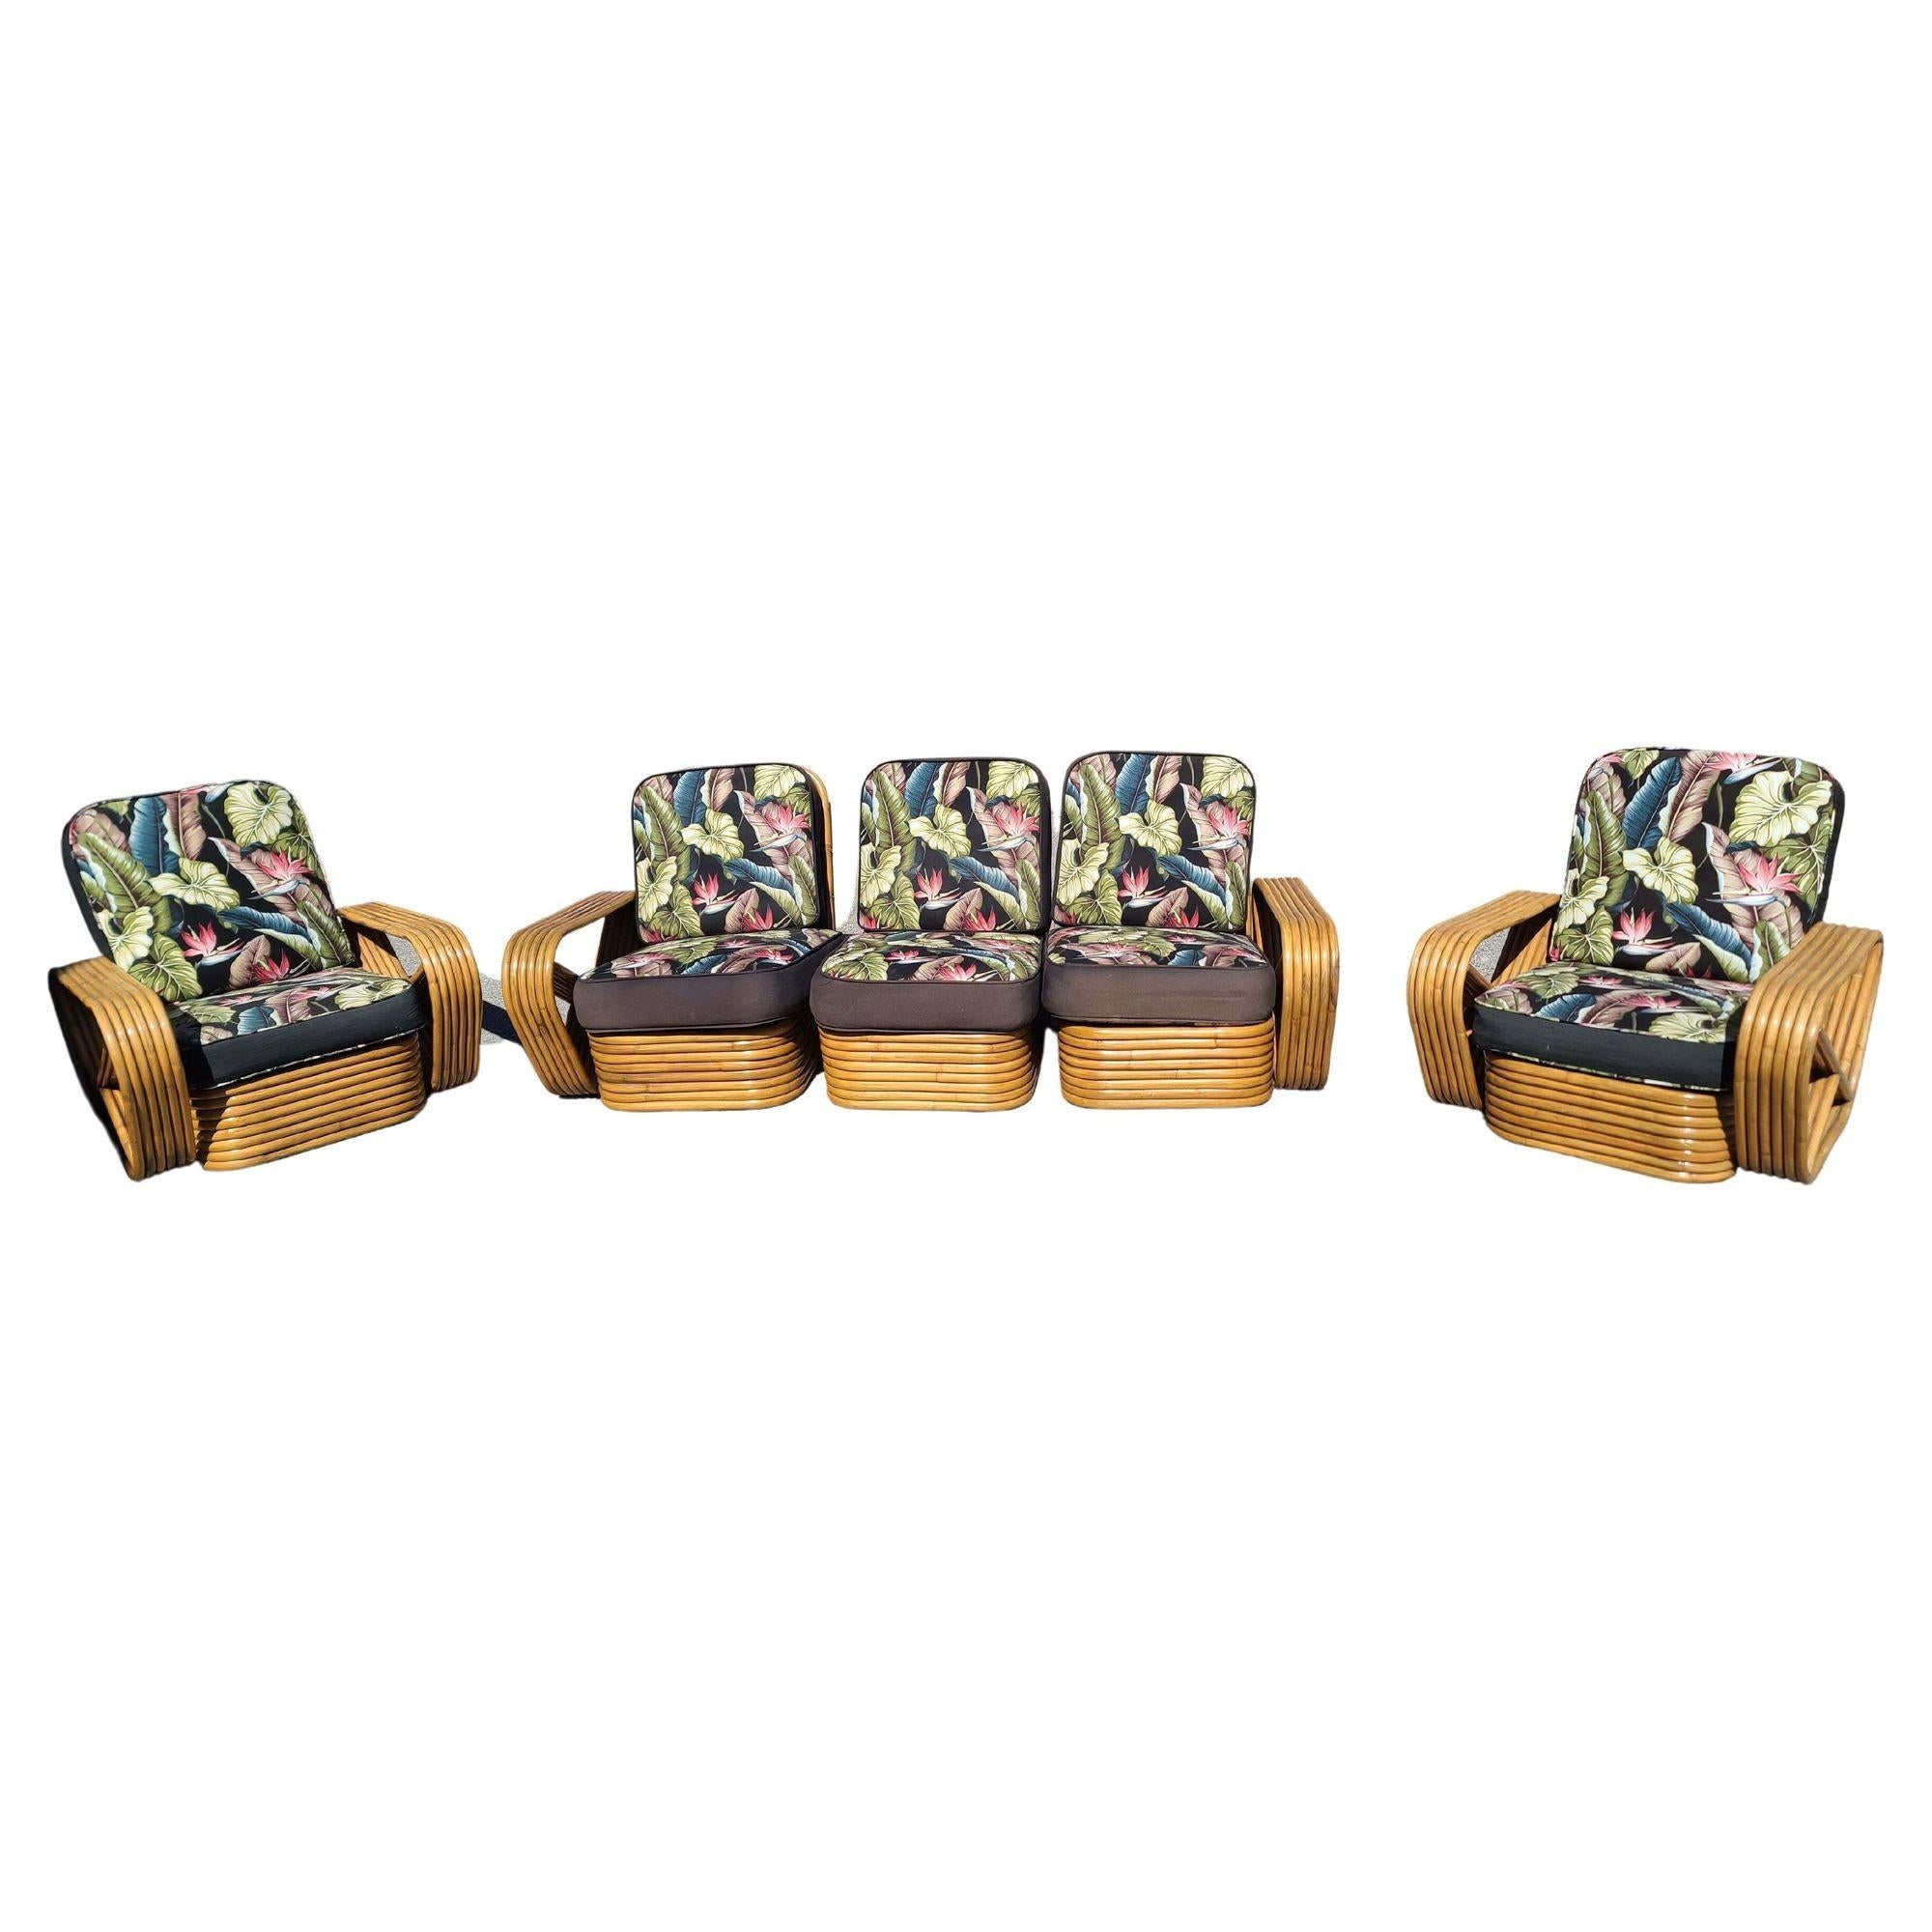 Art Deco Rattan living-room set including a matching sectional sofa and lounge chair. Both feature the famous six-strand square pretzel side arms and stacked rattan base originally designed by Pa Frankl. The seats are covered in palm-leaf patterned